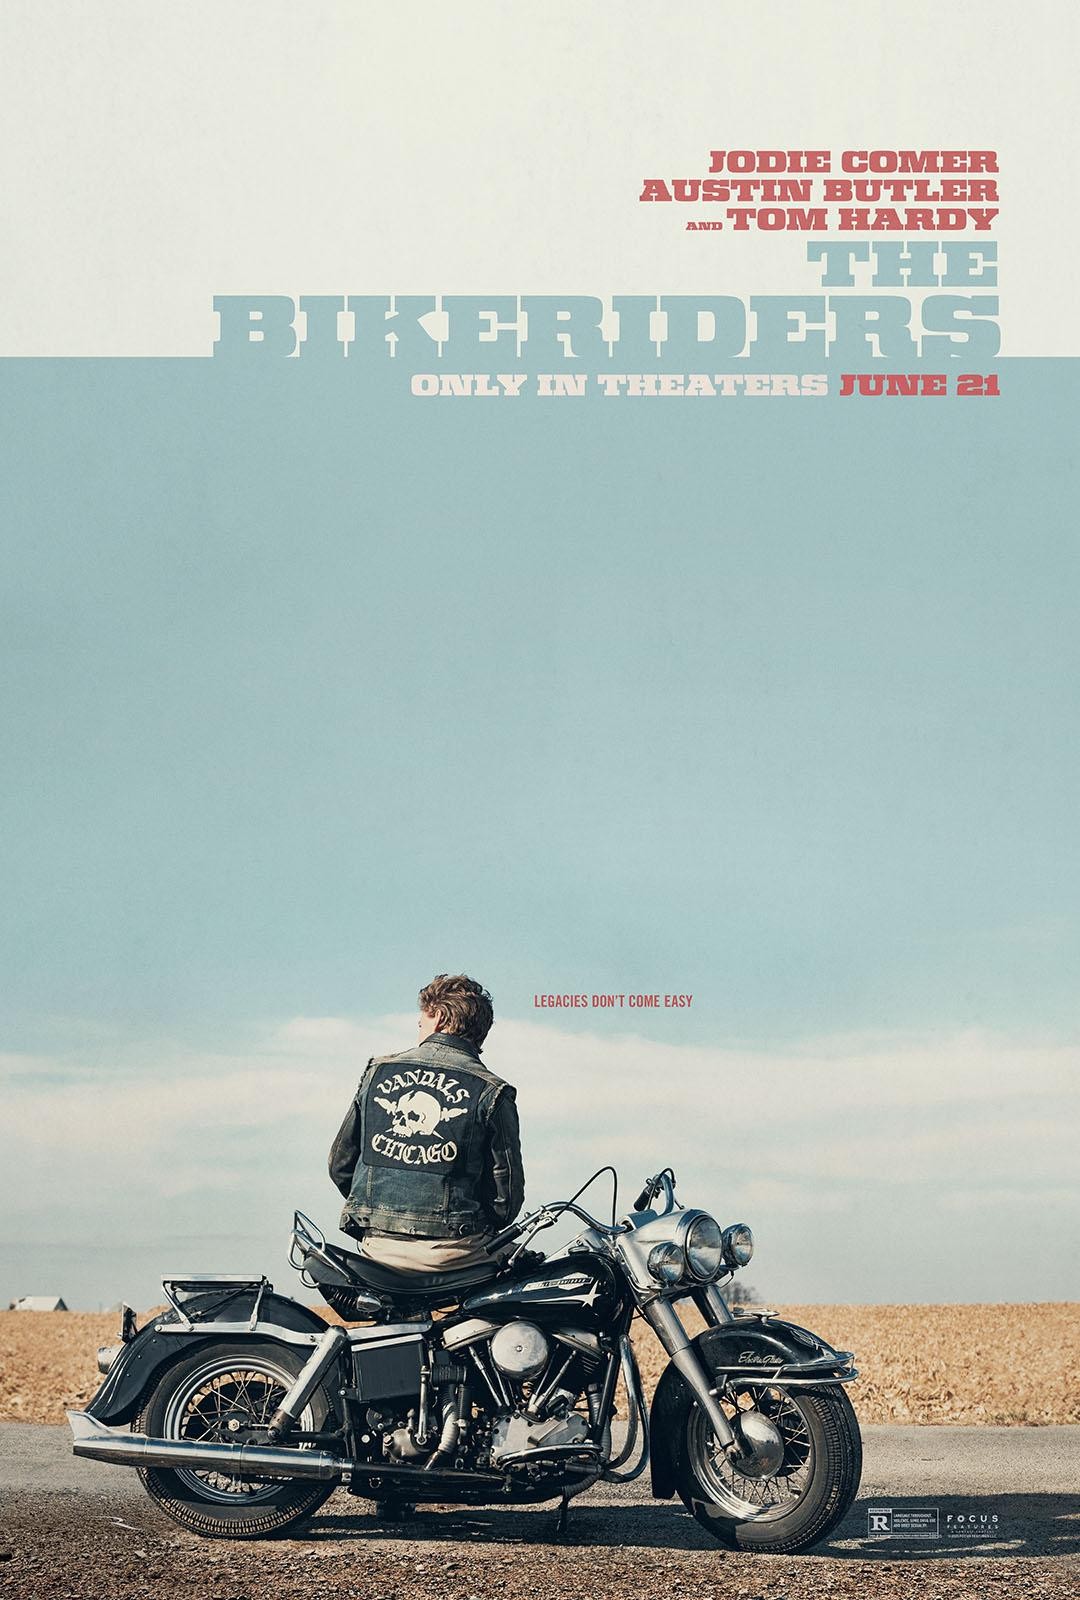 Your favorite actors like Austin Butler, Mike Faist, and Jodie Comer are back in this edgy summer movie, which follows a Chicago motorcycle club for over a decade. While the story is fictional, it was inspired by the real 1967 photobook by Danny Lyon! Watch <em>The Bikeriders</em> trailer <strong>here</strong>. <em>The Bikeriders hits theaters June 21, 2024 and stars Austin Butler, Jodie Comer, Mike Faist, Tom Hardy, Boyd Holbrook, Norman Reedus, and Michael Shannon.</em>